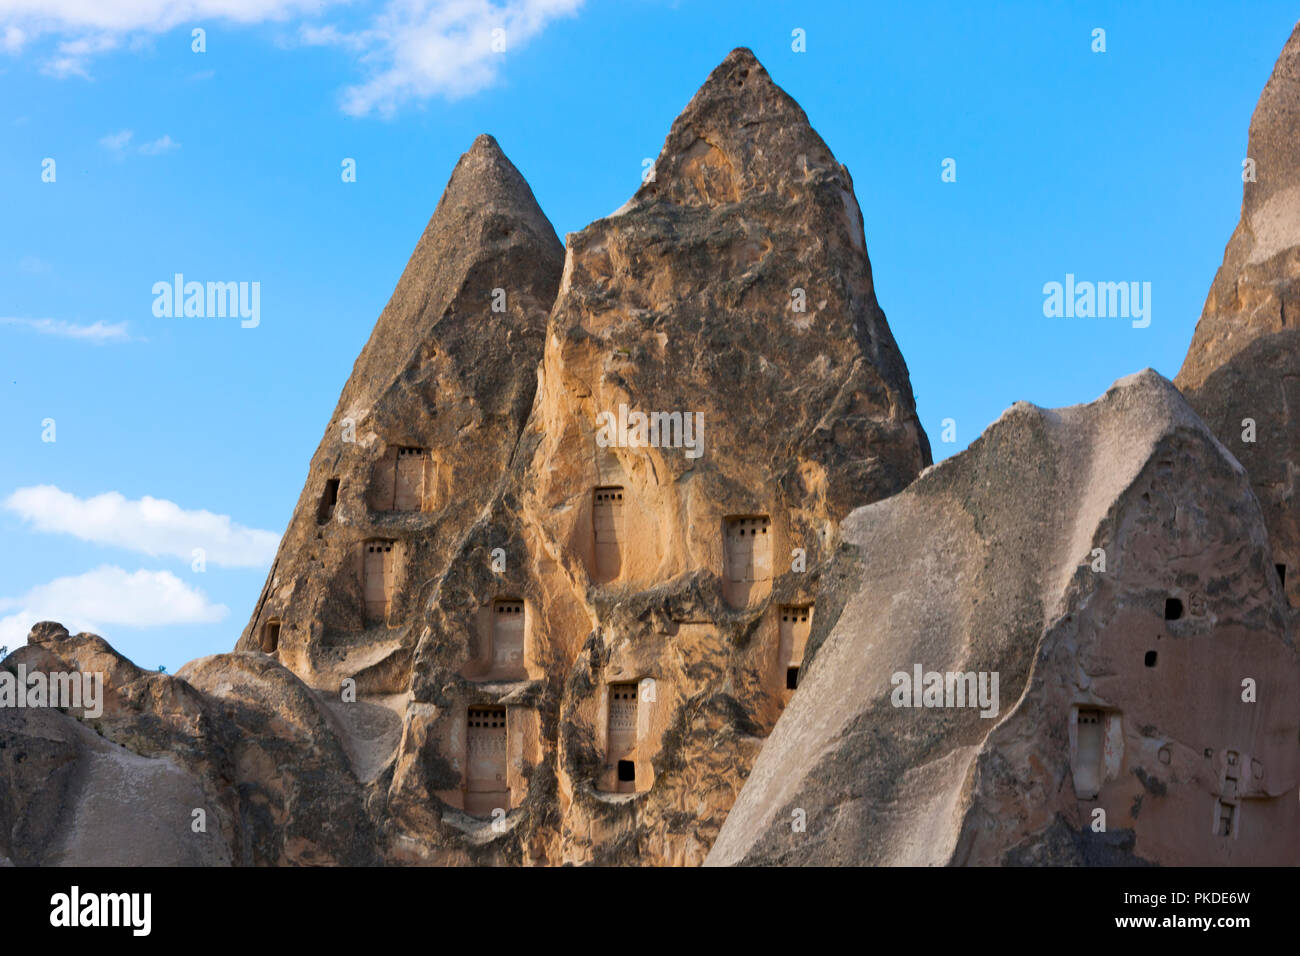 Houses carved into the rock formations in the valley, Goreme, Cappadocia, Turkey (UNESCO World Heritage site) Stock Photo